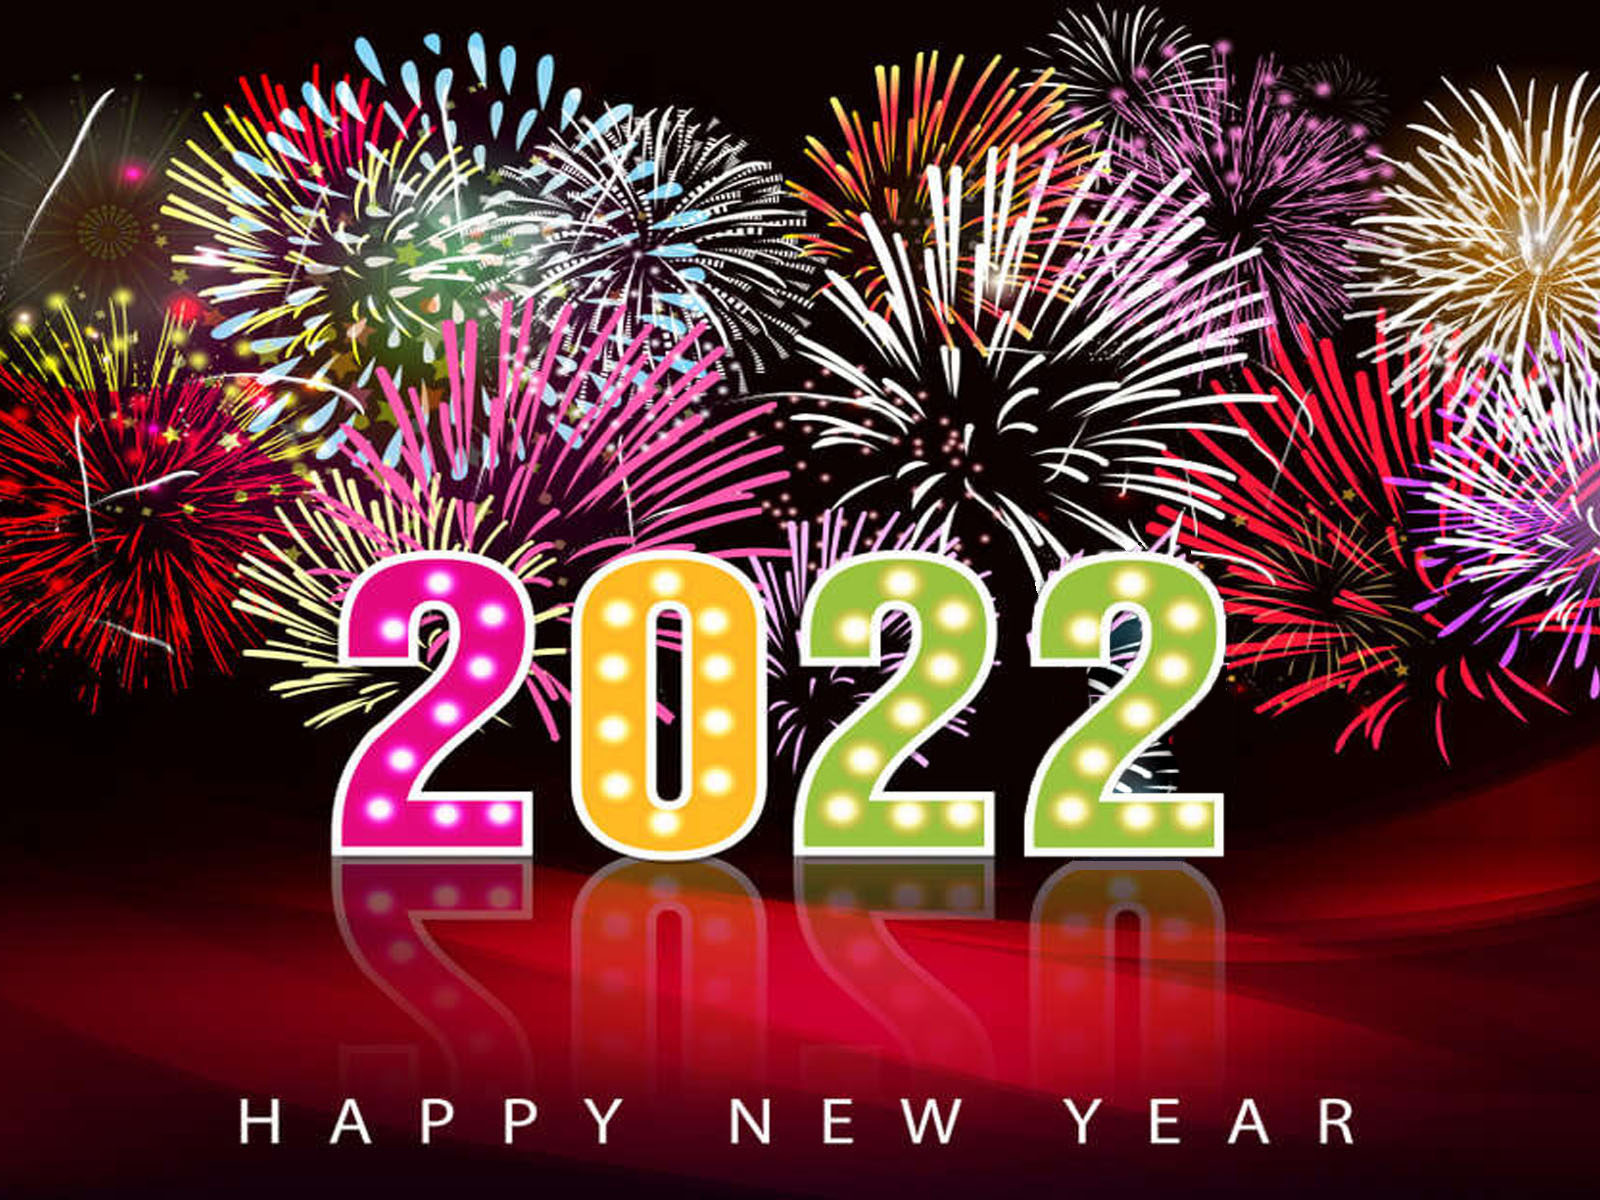 Greeting For New Year's Eve 2022 Fireworks In Night HD Wallpaper, Wallpaper13.com